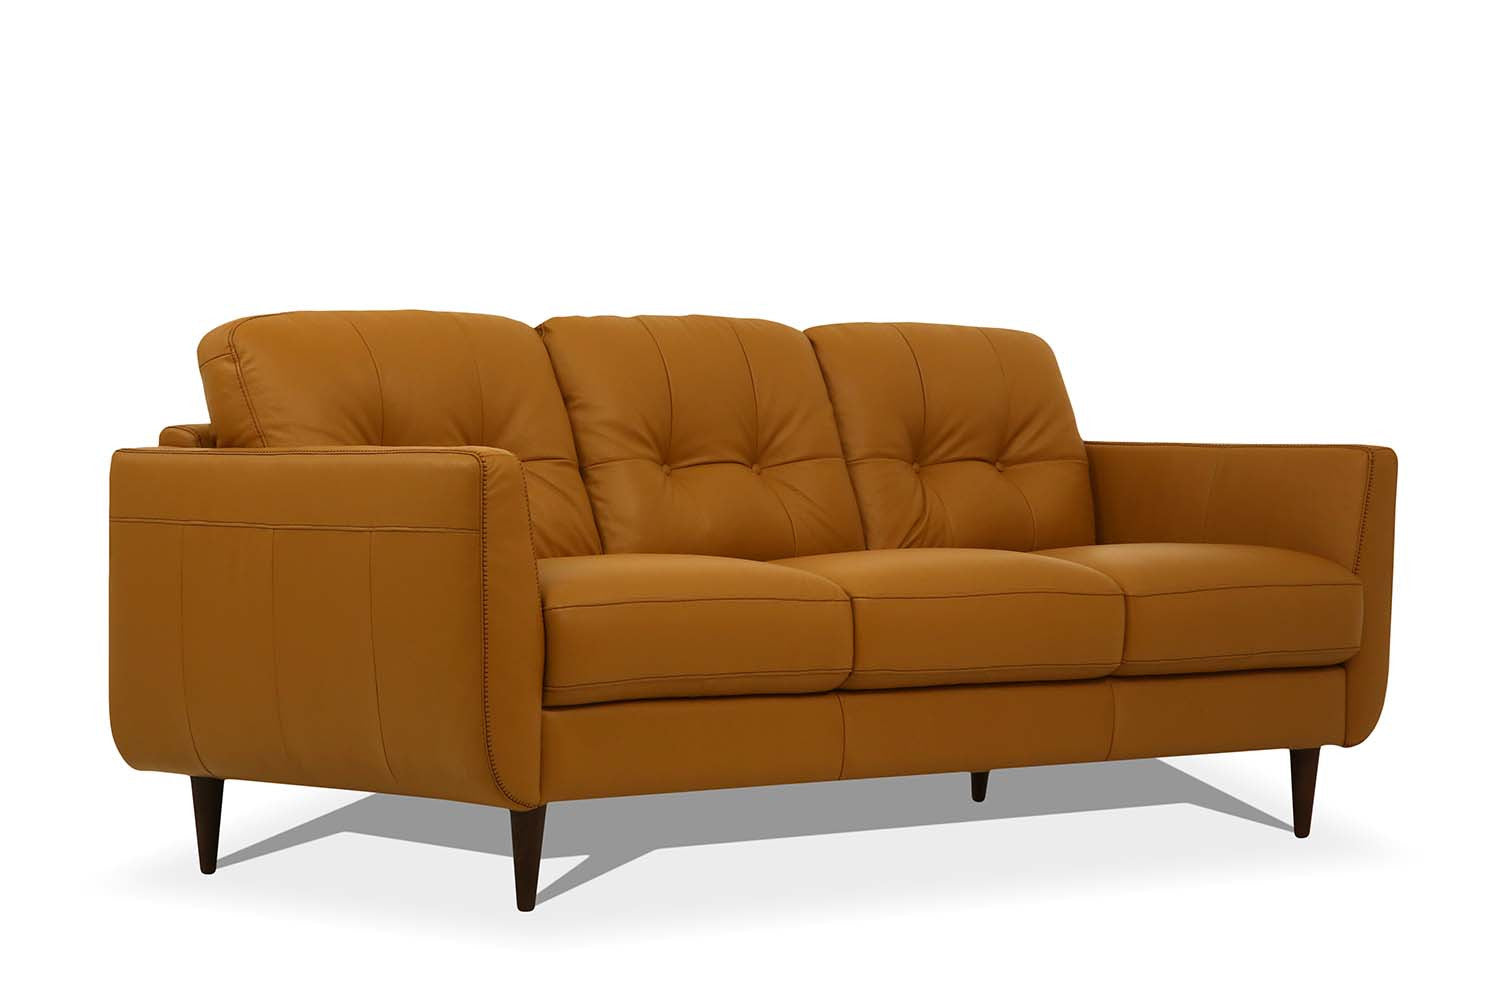 83" Camel Leather And Black Sofa